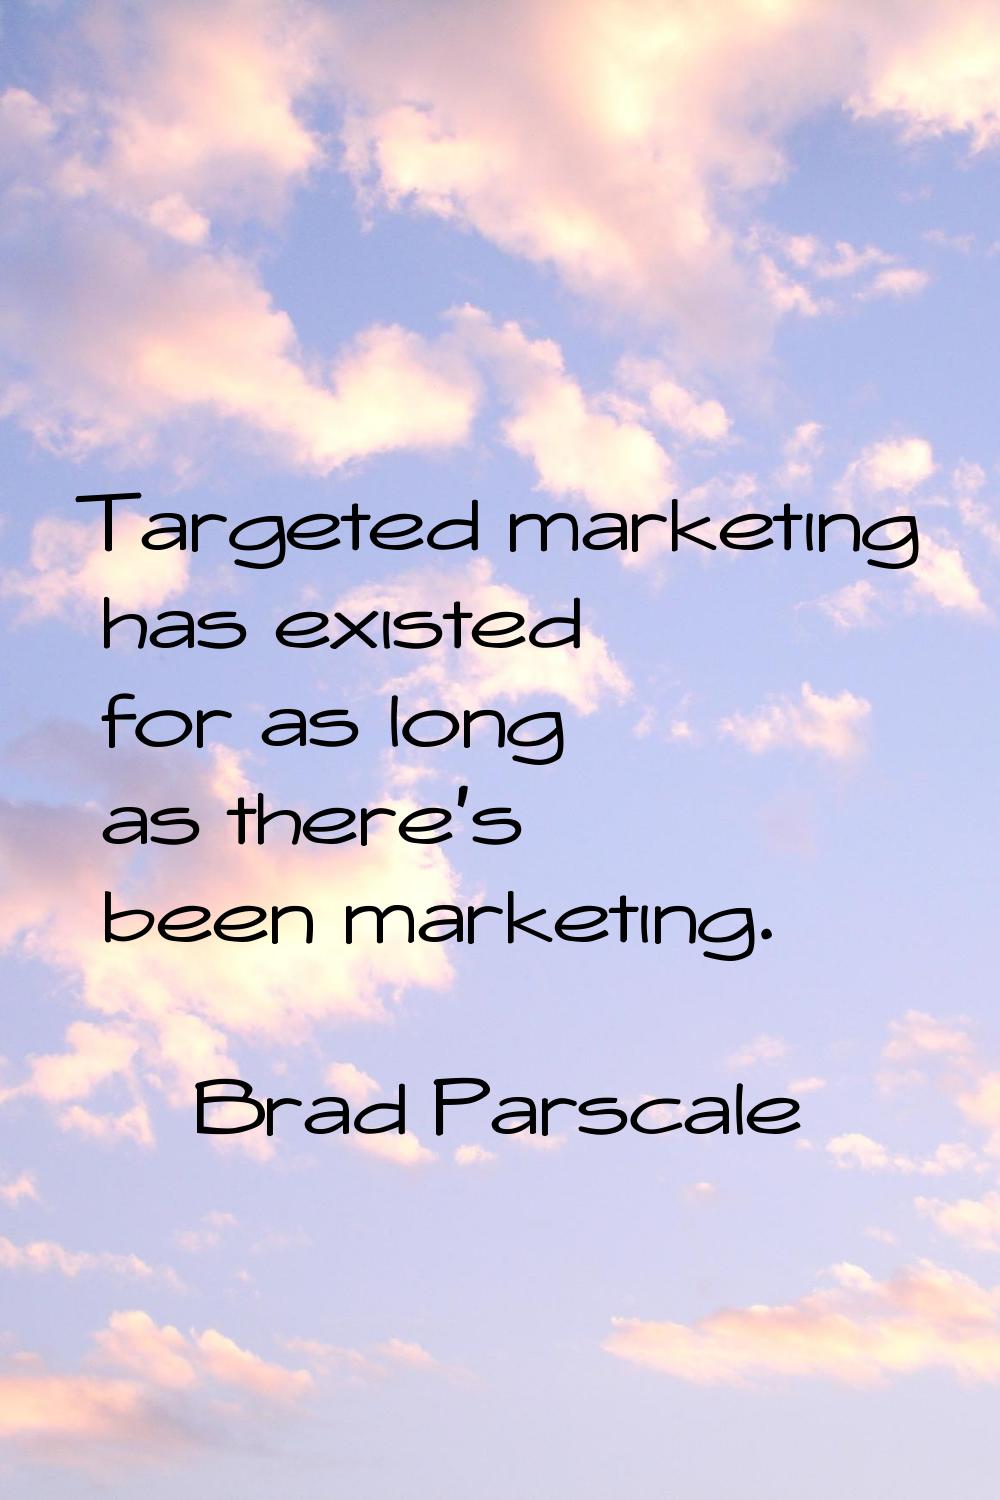 Targeted marketing has existed for as long as there's been marketing.